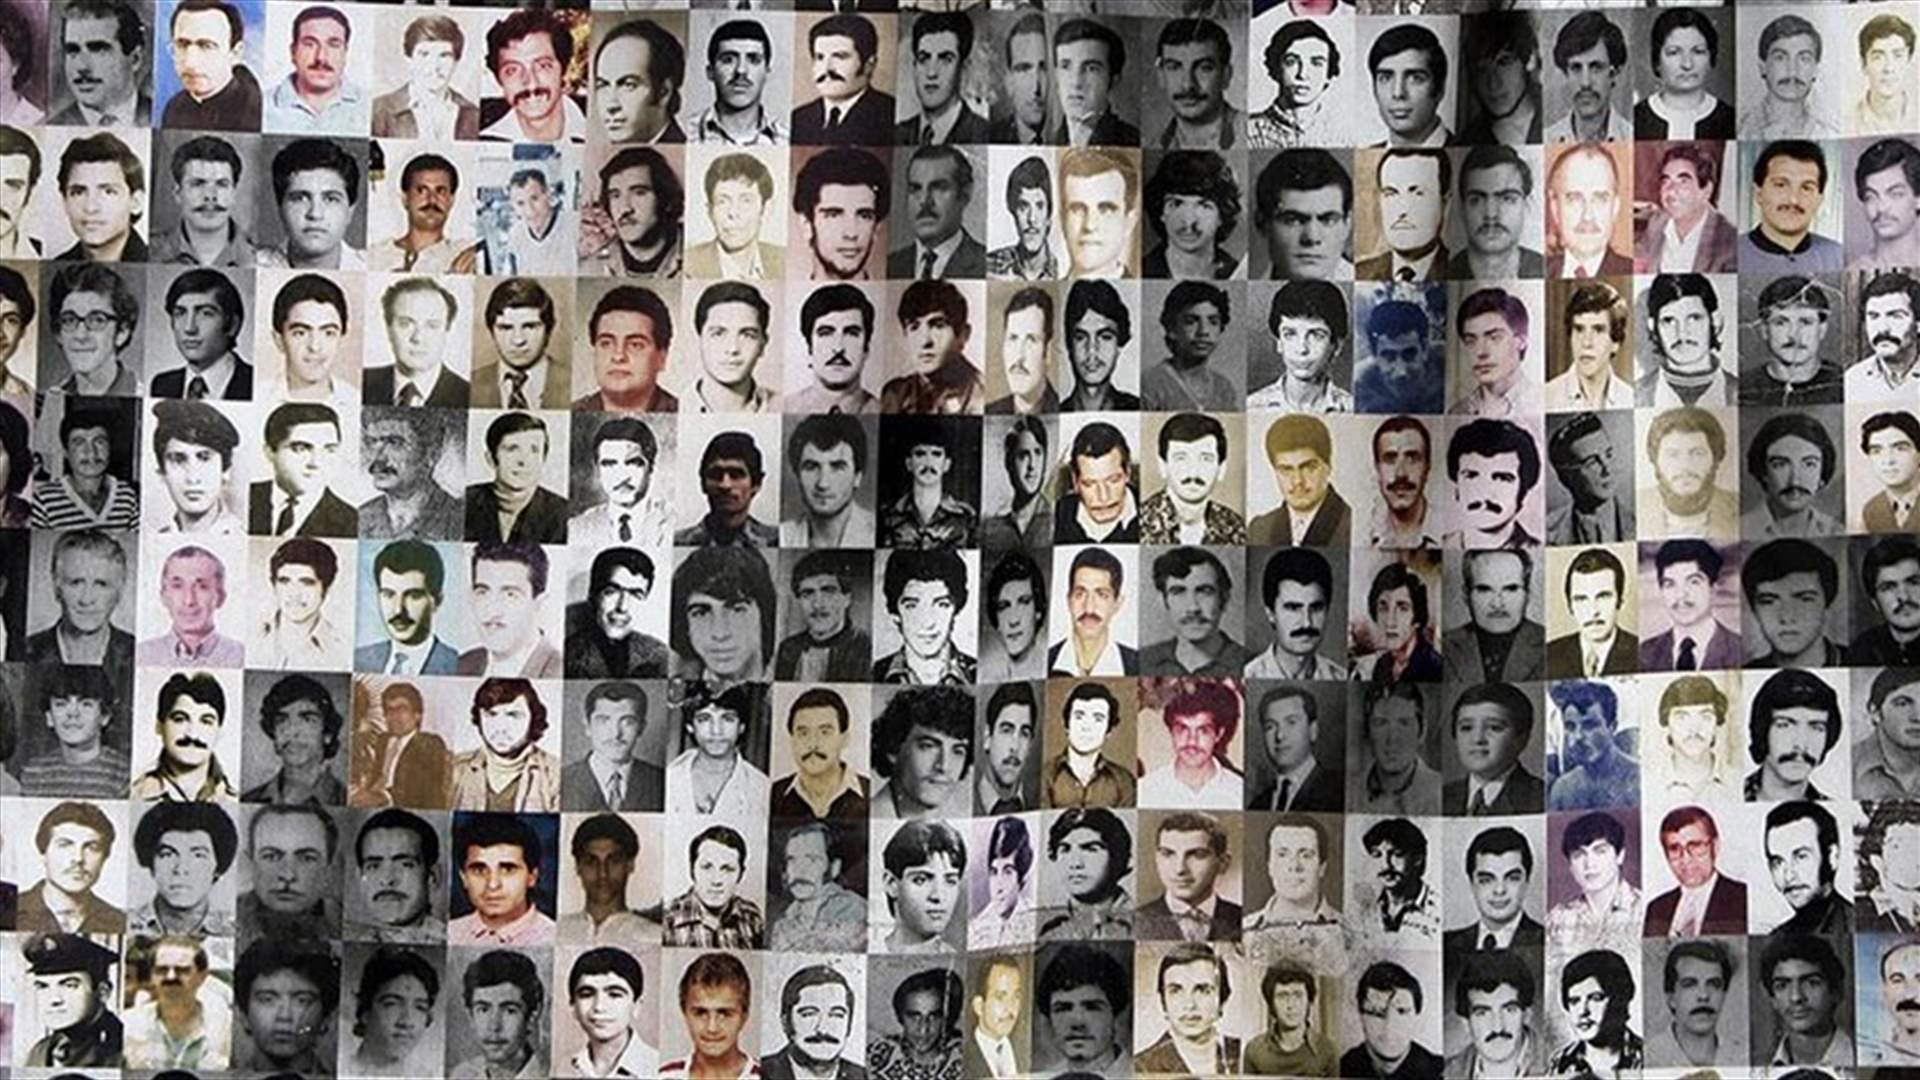 Parliament passes law to uncover fate of the disappeared